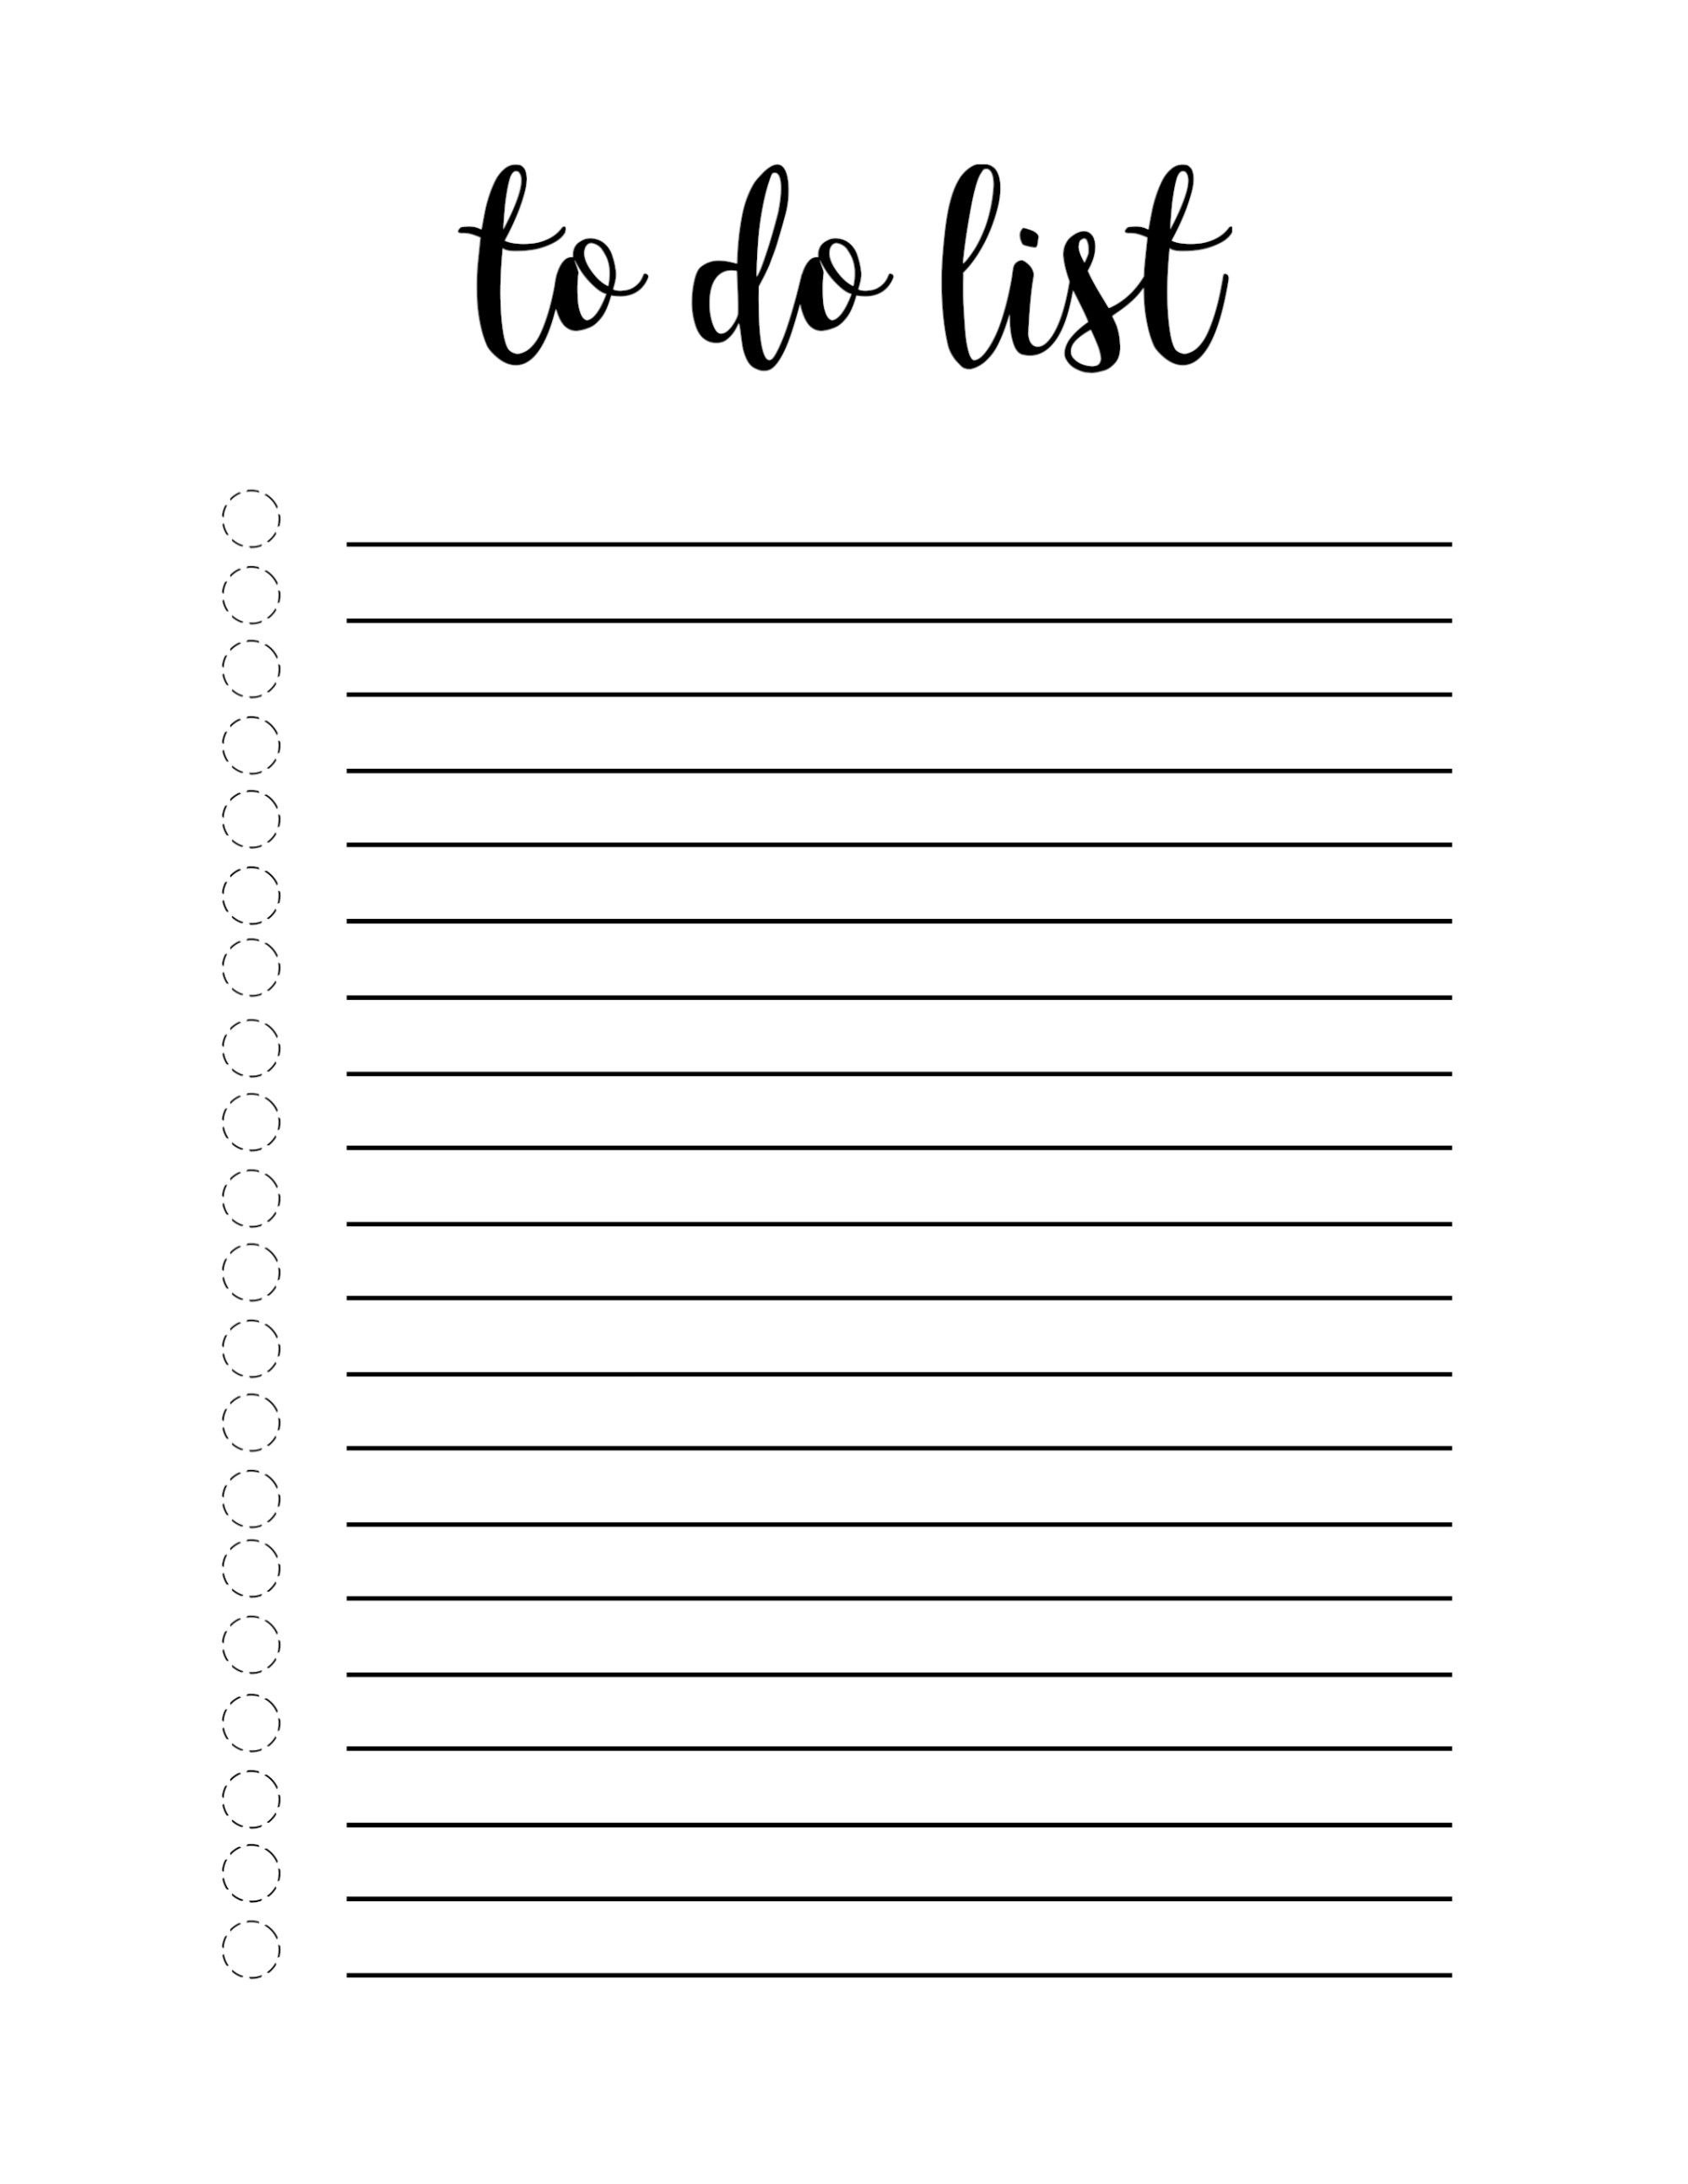 Free Printable To Do List Template  Making Notebooks  Free To Do within Blank To Do List Template